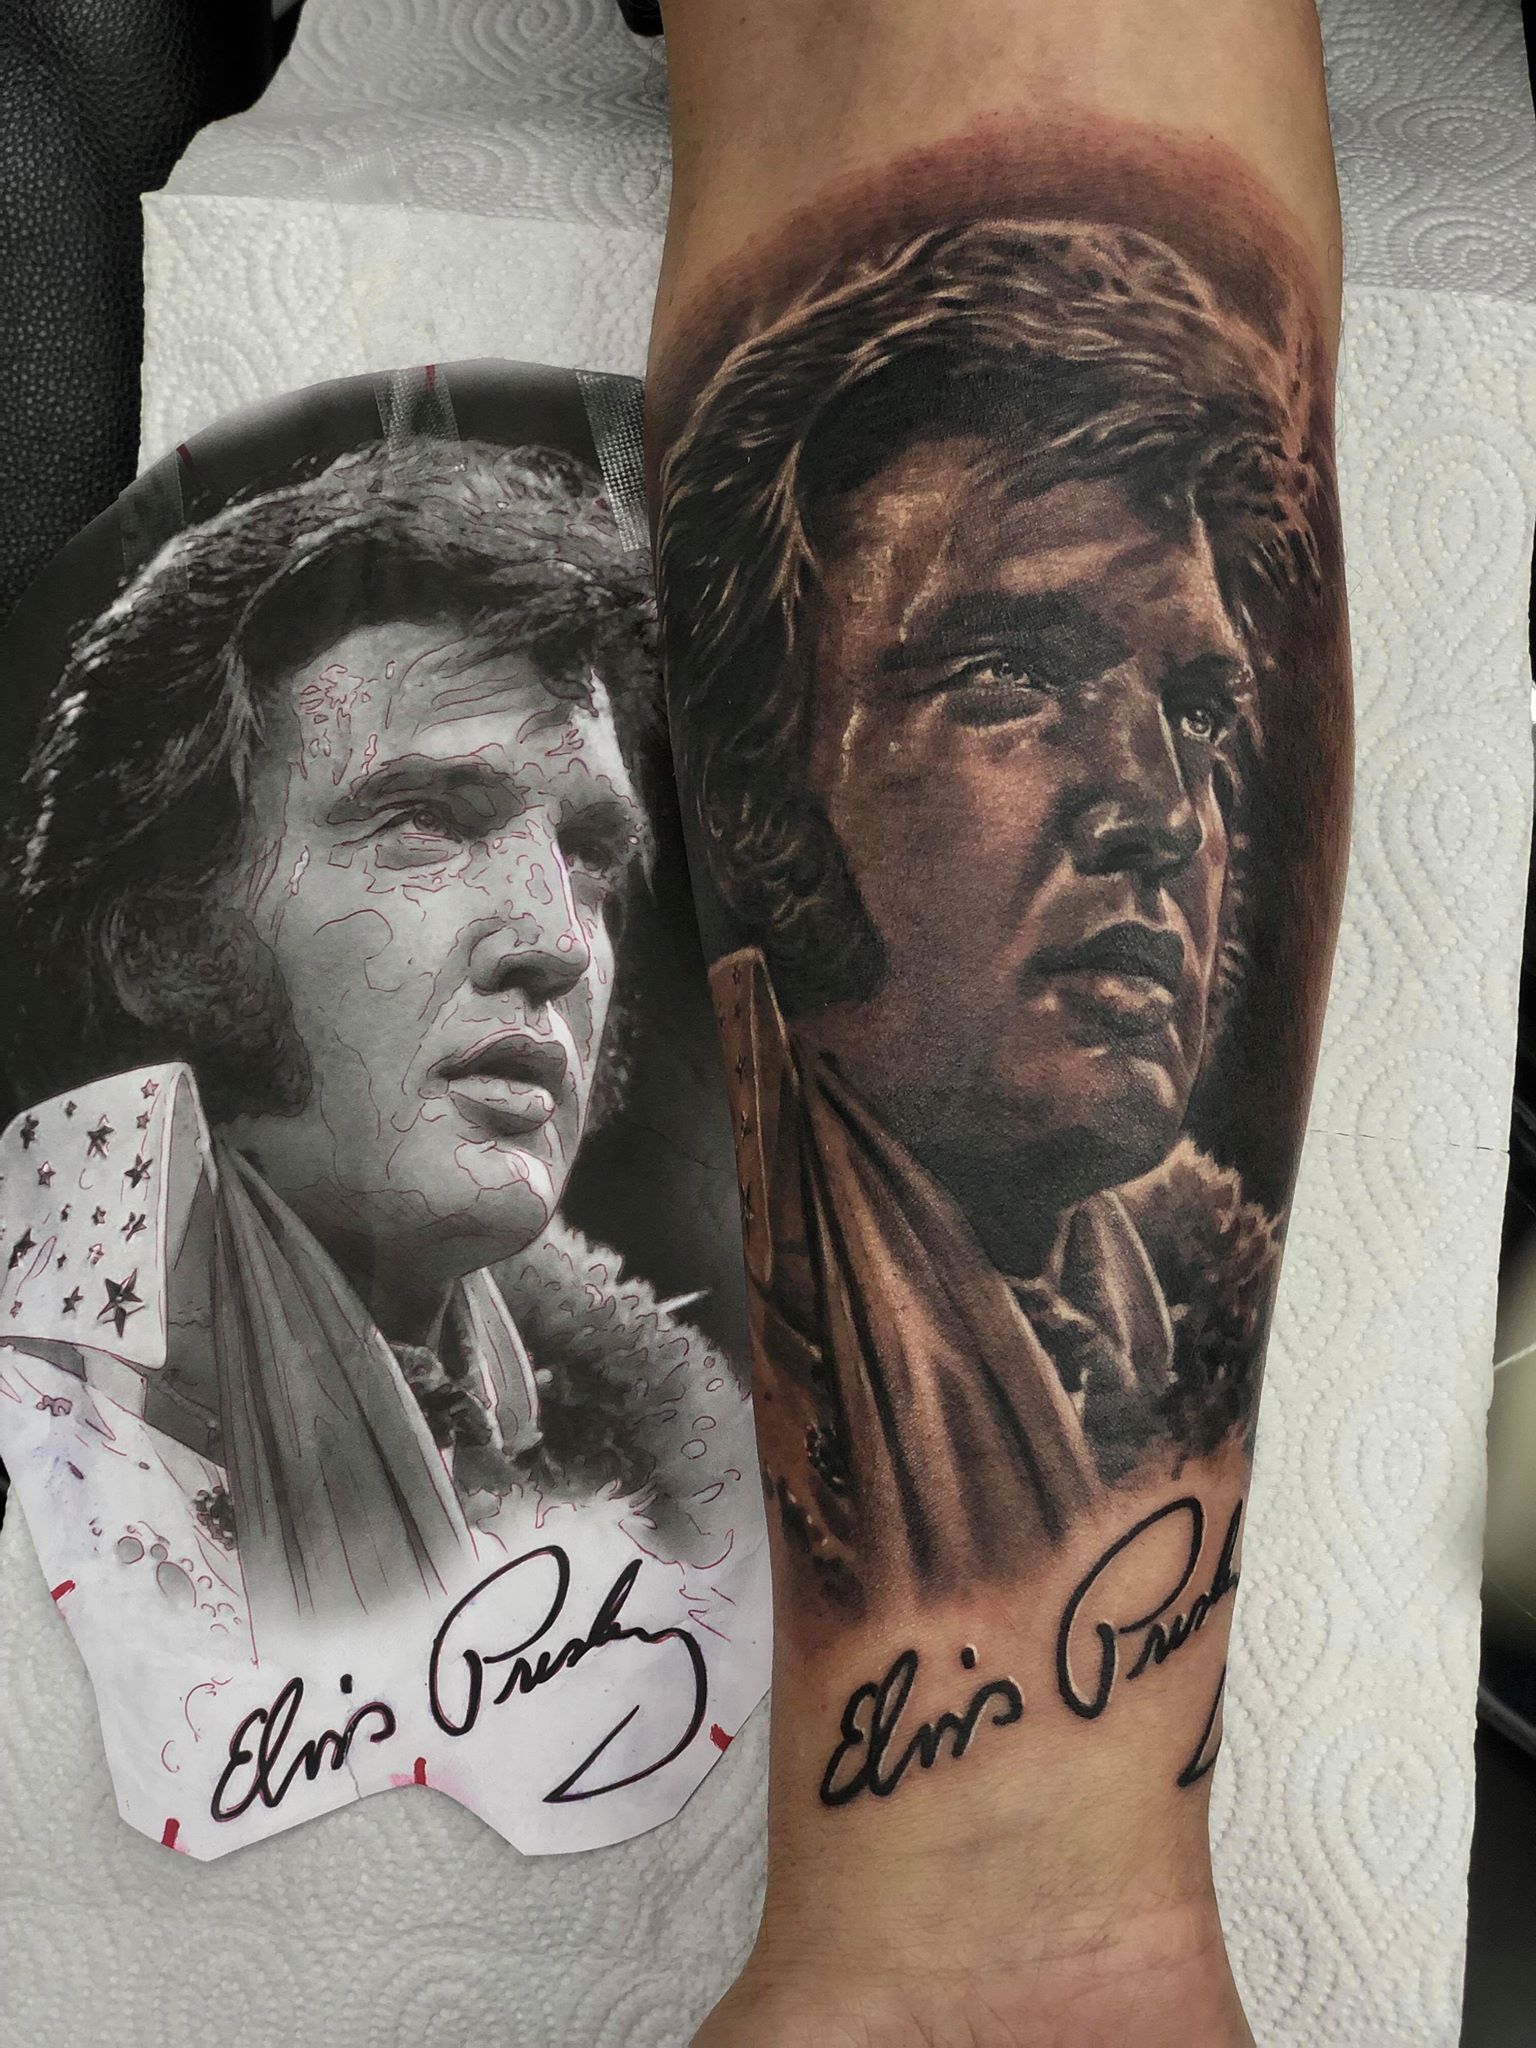 60 Elvis Presley Tattoos For Men  King Of Rock And Roll Design Ideas   Tattoos for guys Tattoos Hand poked tattoo